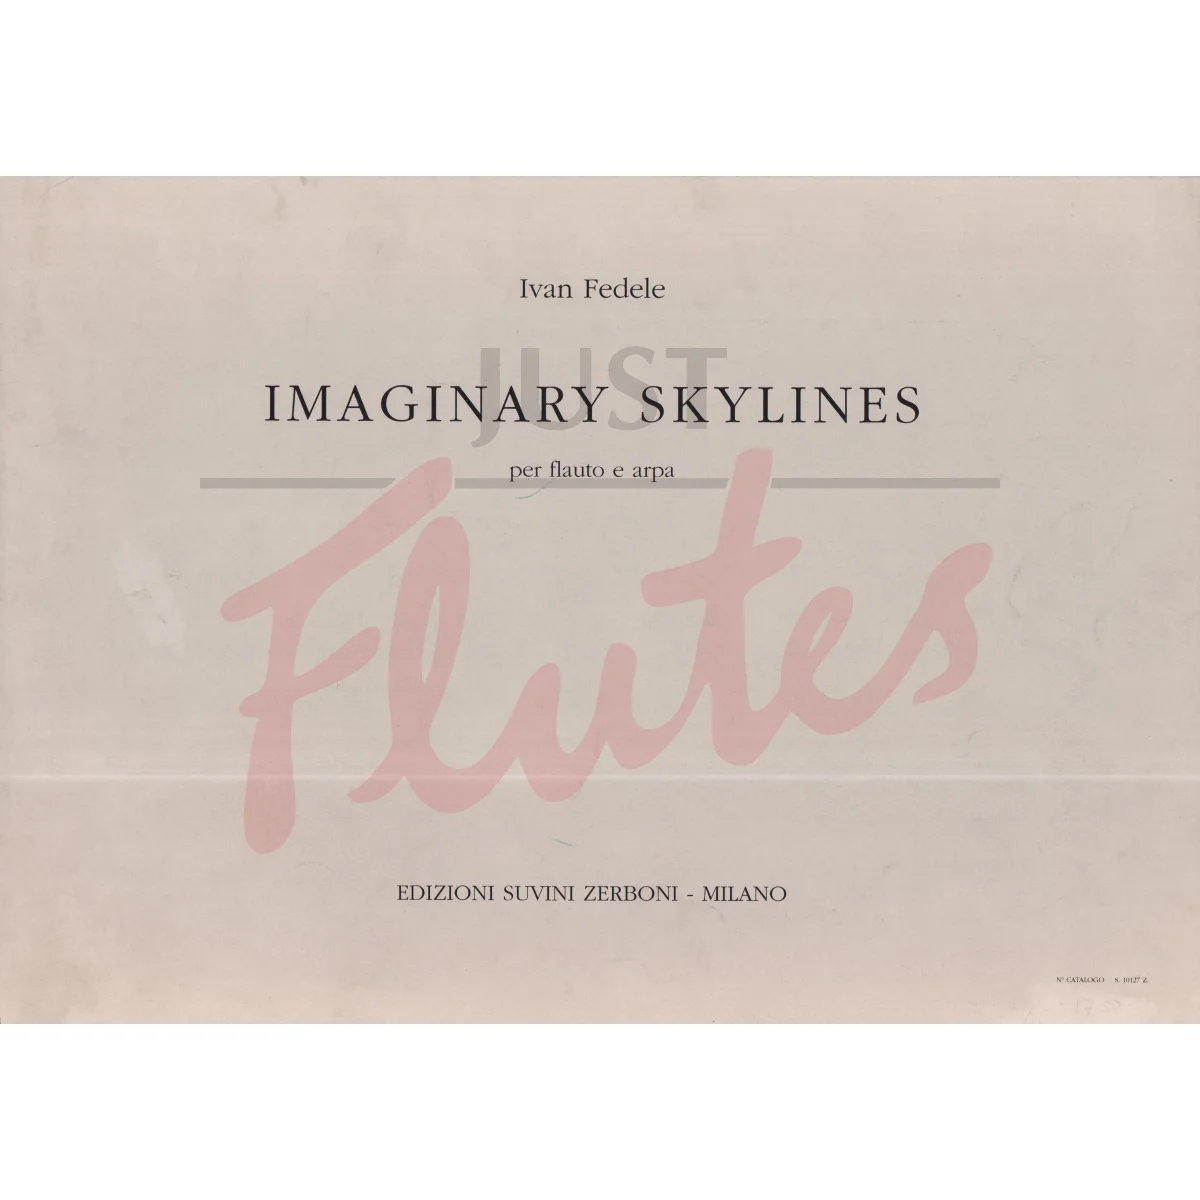 Imaginary Skylines for Flute and Harp